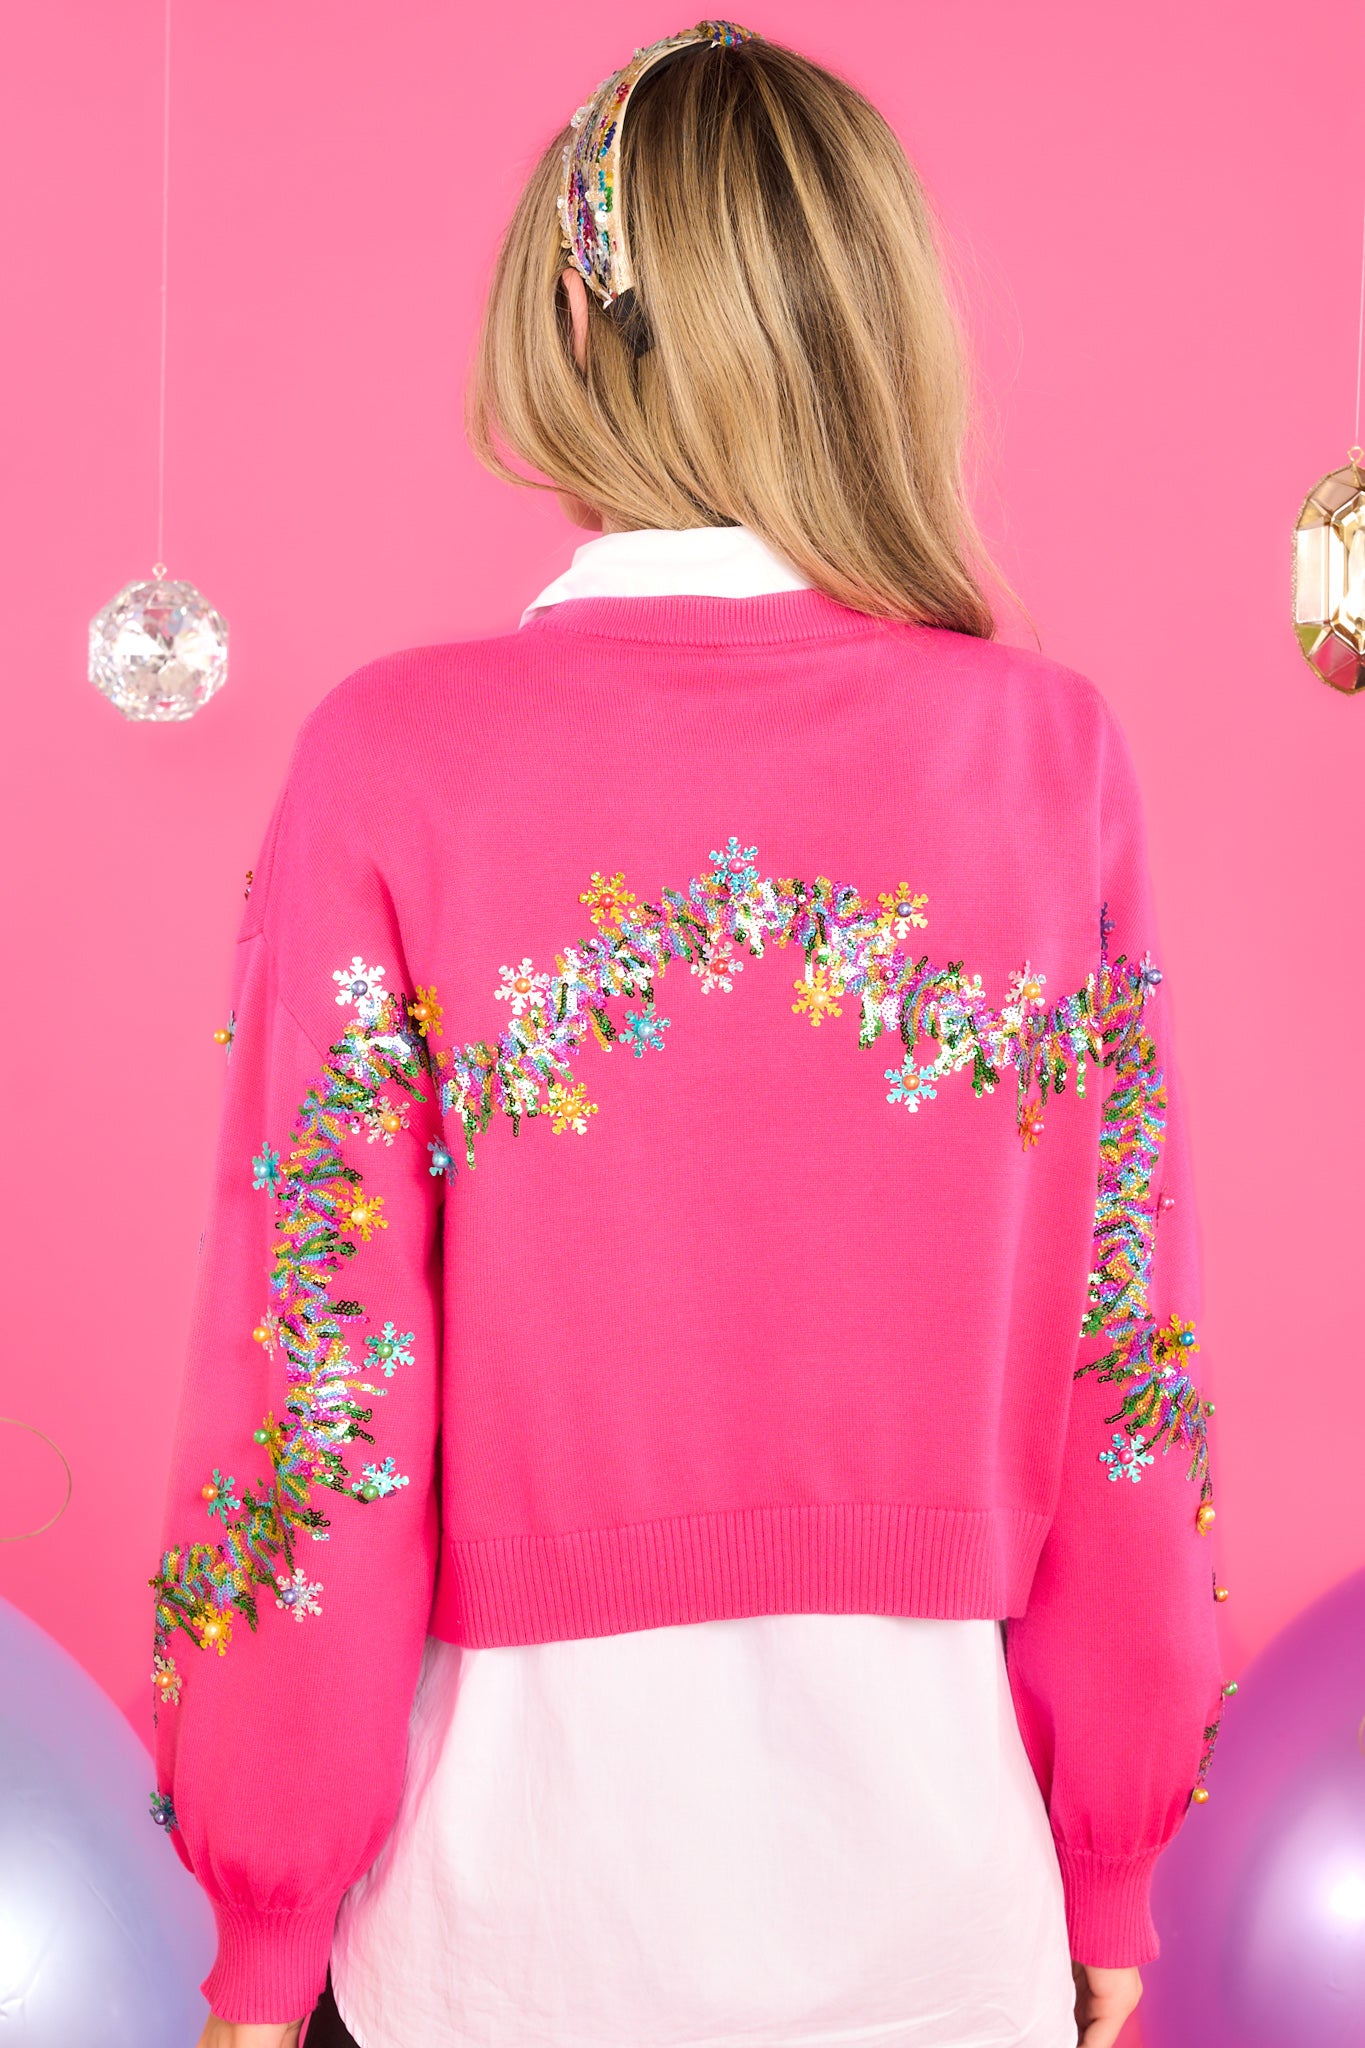 Queen of Sparkles Bright Pink Feather Christmas Tree & Candy Sweater, Med / Bright Pink